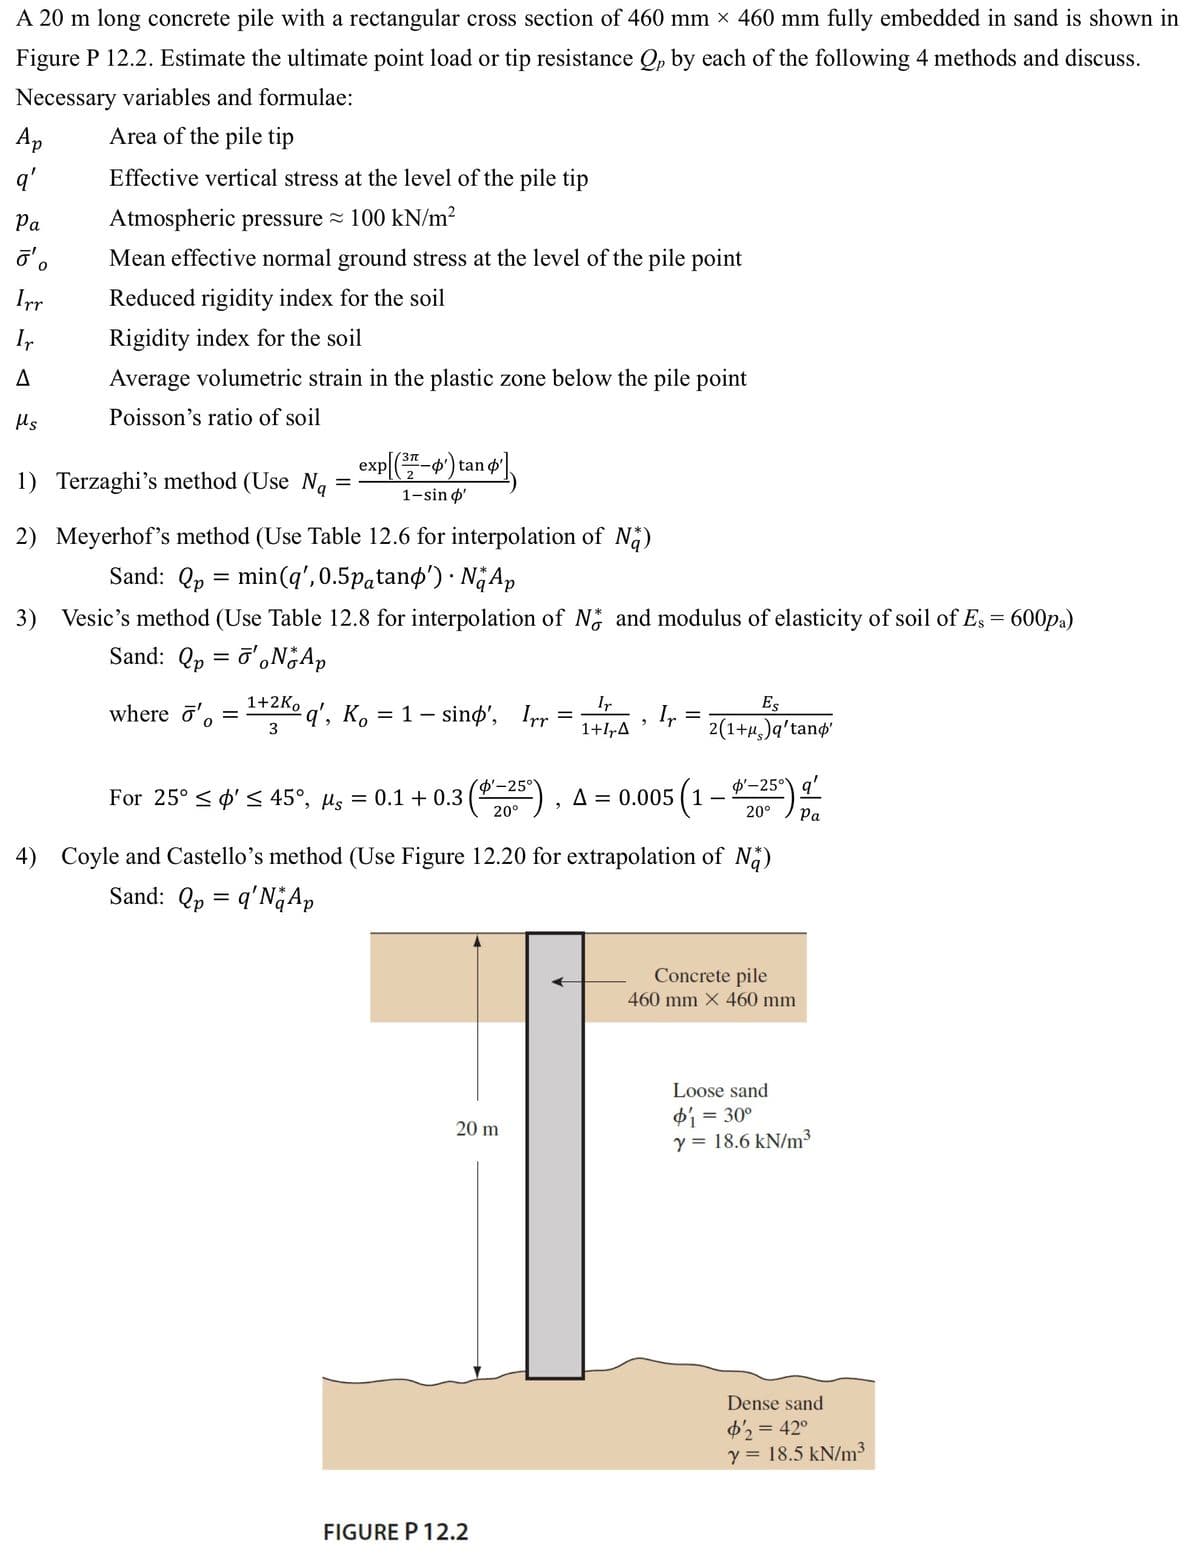 A 20 m long concrete pile with a rectangular cross section of 460 mm × 460 mm fully embedded in sand is shown in
Figure P 12.2. Estimate the ultimate point load or tip resistance Qp by each of the following 4 methods and discuss.
Necessary variables and formulae:
Area of the pile tip
Effective vertical stress at the level of the pile tip
Atmospheric pressure 100 kN/m²
Ap
q'
Pa
o'o
Irr
Ir
A
Ms
Mean effective normal ground stress at the level of the pile point
Reduced rigidity index for the soil
Rigidity index for the soil
Average volumetric strain in the plastic zone below the pile point
Poisson's ratio of soil
1) Terzaghi's method (Use Ng
=
2) Meyerhof's method (Use Table 12.6 for interpolation of Na)
Sand: Qp = min (q', 0.5påtanp') · Nä Ap
3) Vesic's method (Use Table 12.8 for interpolation of N and modulus of elasticity of soil of Es = 600pa)
Sand: Qp = ō'。No Ap
where ' =
0
exp[(37-4¹) tan d'
2
1-sin o'
1+2Ko
3
q', K. = 1 - sino', Irr
=
20 m
Ir
1+1,Δ
FIGURE P 12.2
9
Ir
=
For 25° ≤ ø' ≤ 45°, µs = 0.1 +0.3 (25¹), A = 0.005 (1 – $¹_25")
'-25°
q'
{
20°
20° Pa
Es
2(1+μ) q' tand'
4) Coyle and Castello's method (Use Figure 12.20 for extrapolation of Na)
Sand: Qp = q'N Ap
Concrete pile
460 mm x 460 mm
Loose sand
φί = 30°
y = 18.6 kN/m³
Dense sand
$'2 = 42°
y = 18.5 kN/m³